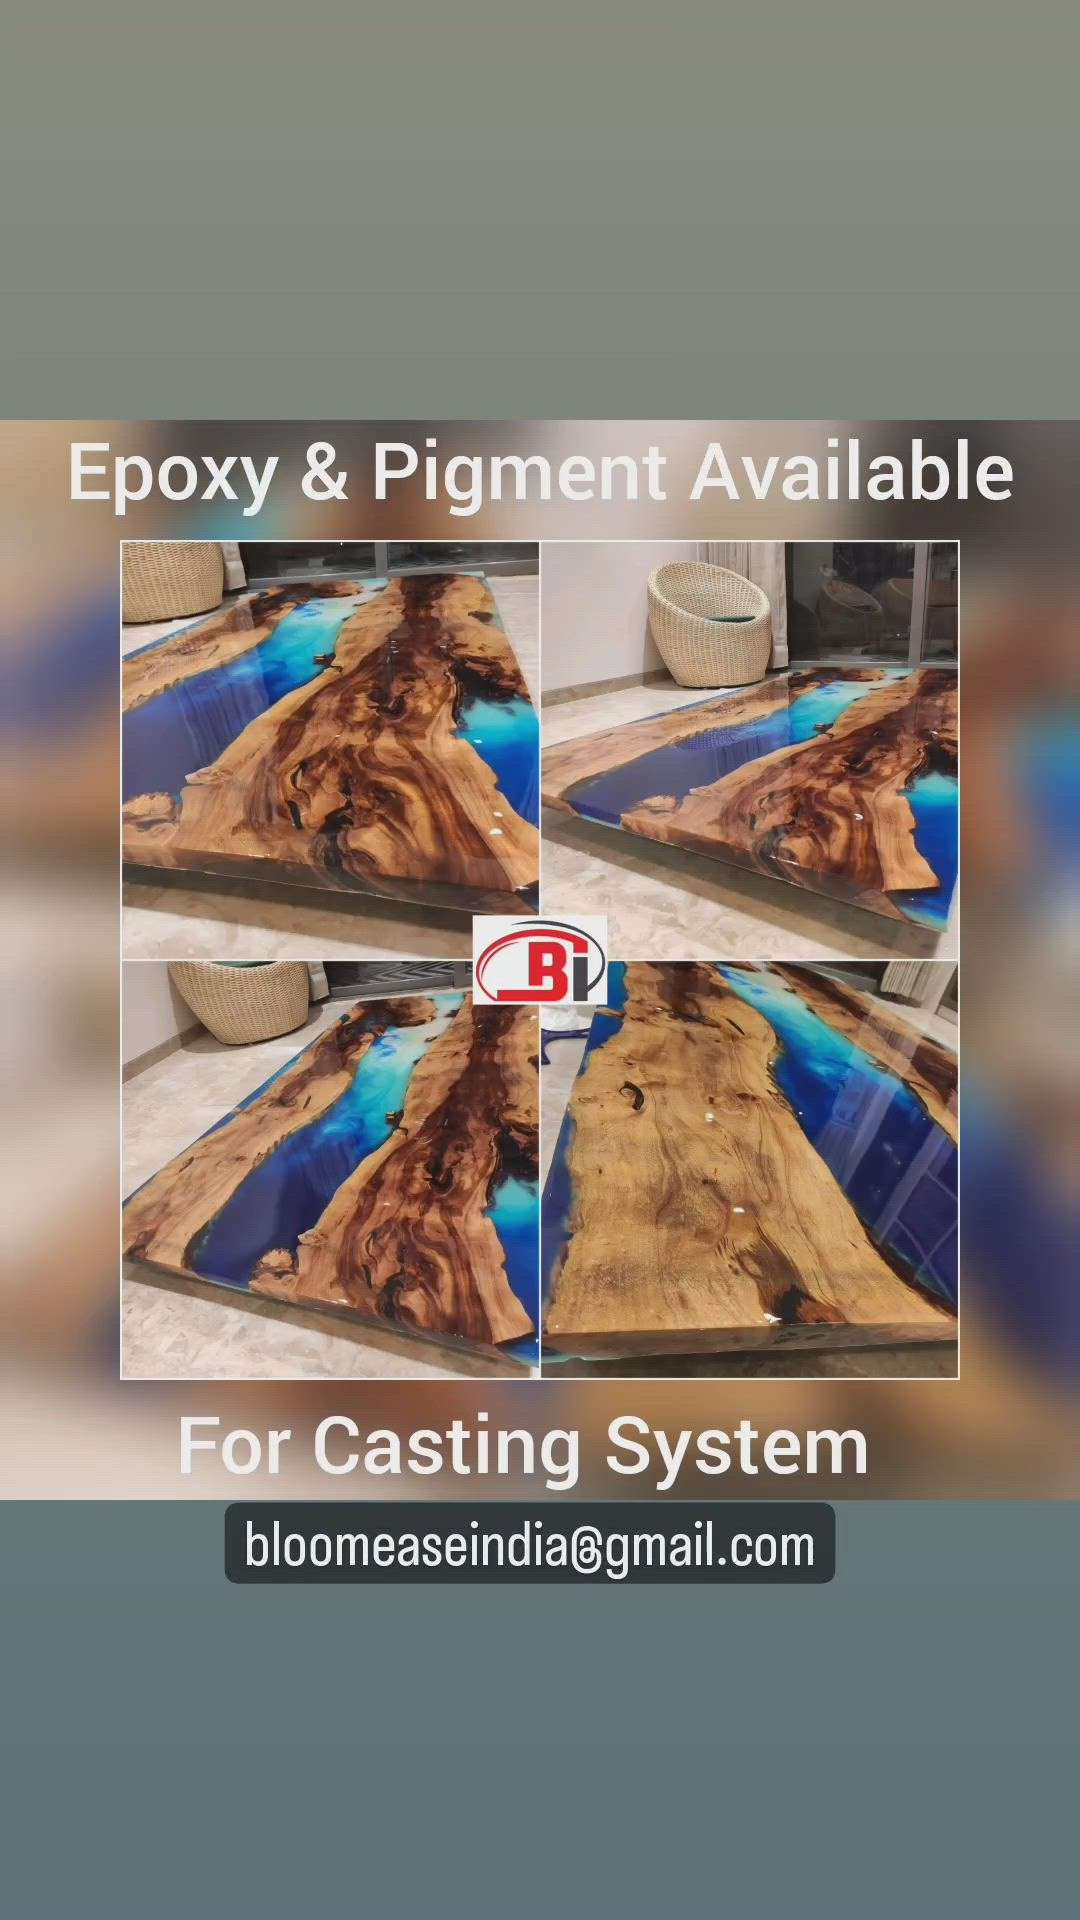 Epoxy & Pigment Available for Casting System.

bloomeaseindia@gmail.com